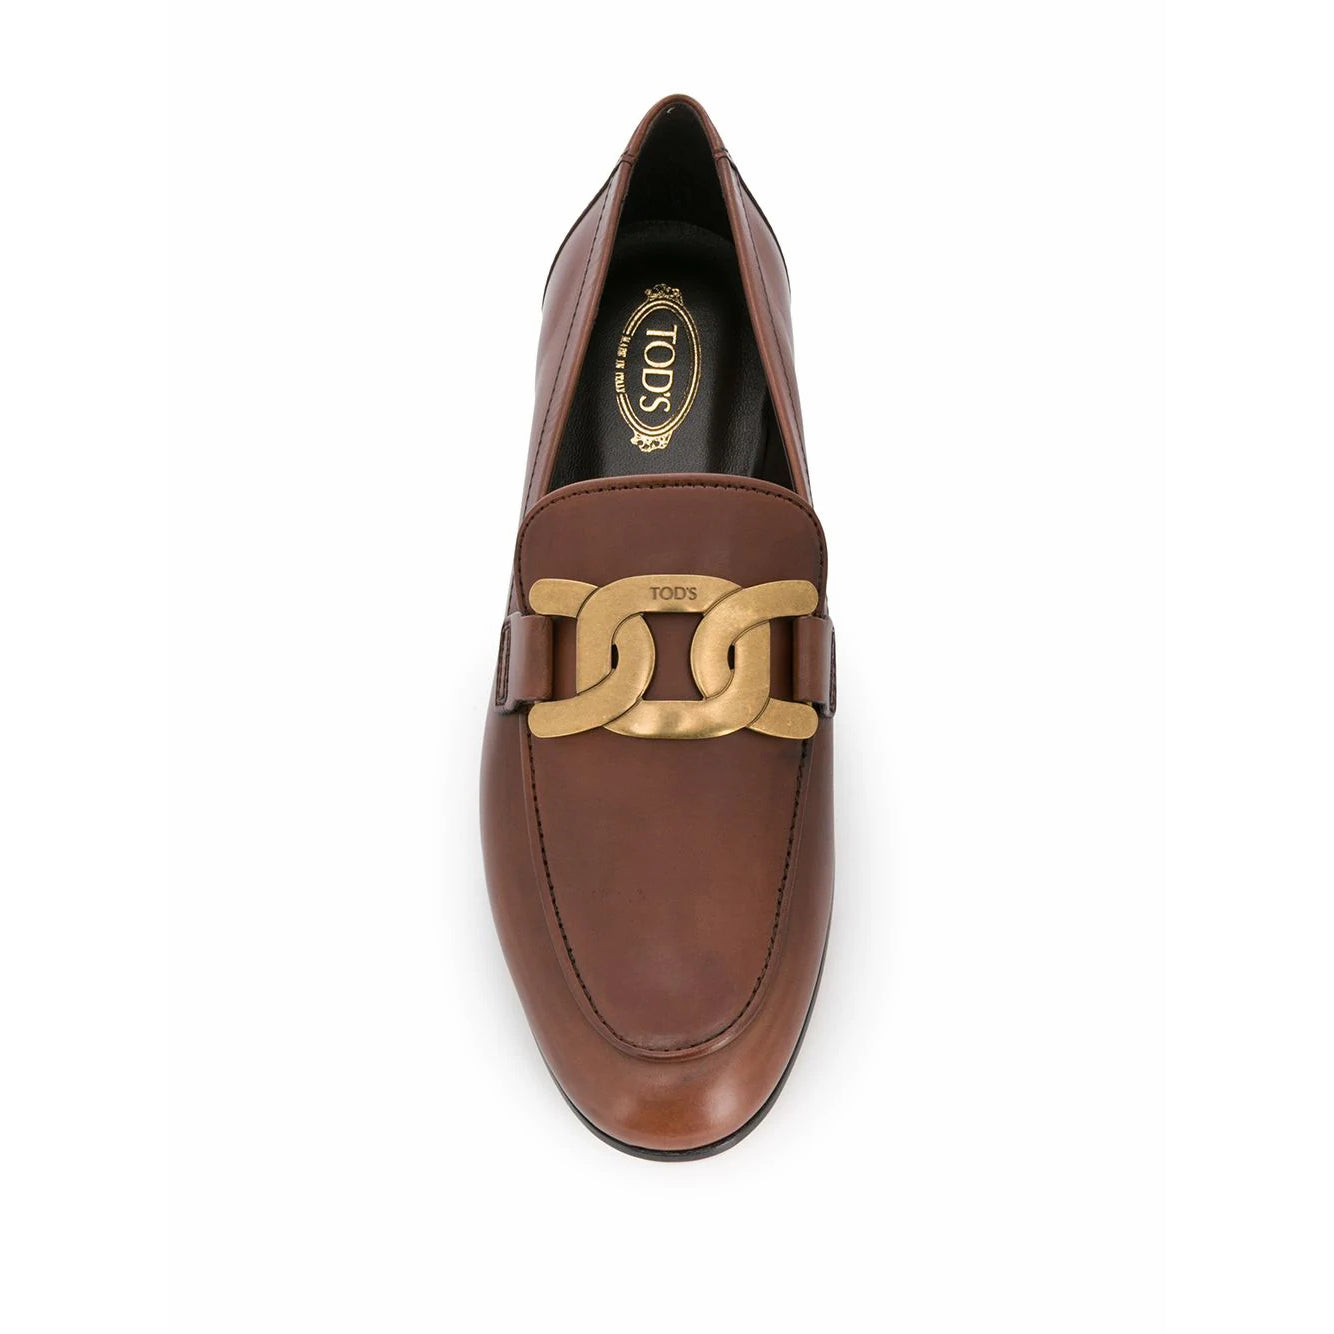 CITY GOMMINI PENNY LOAFERS